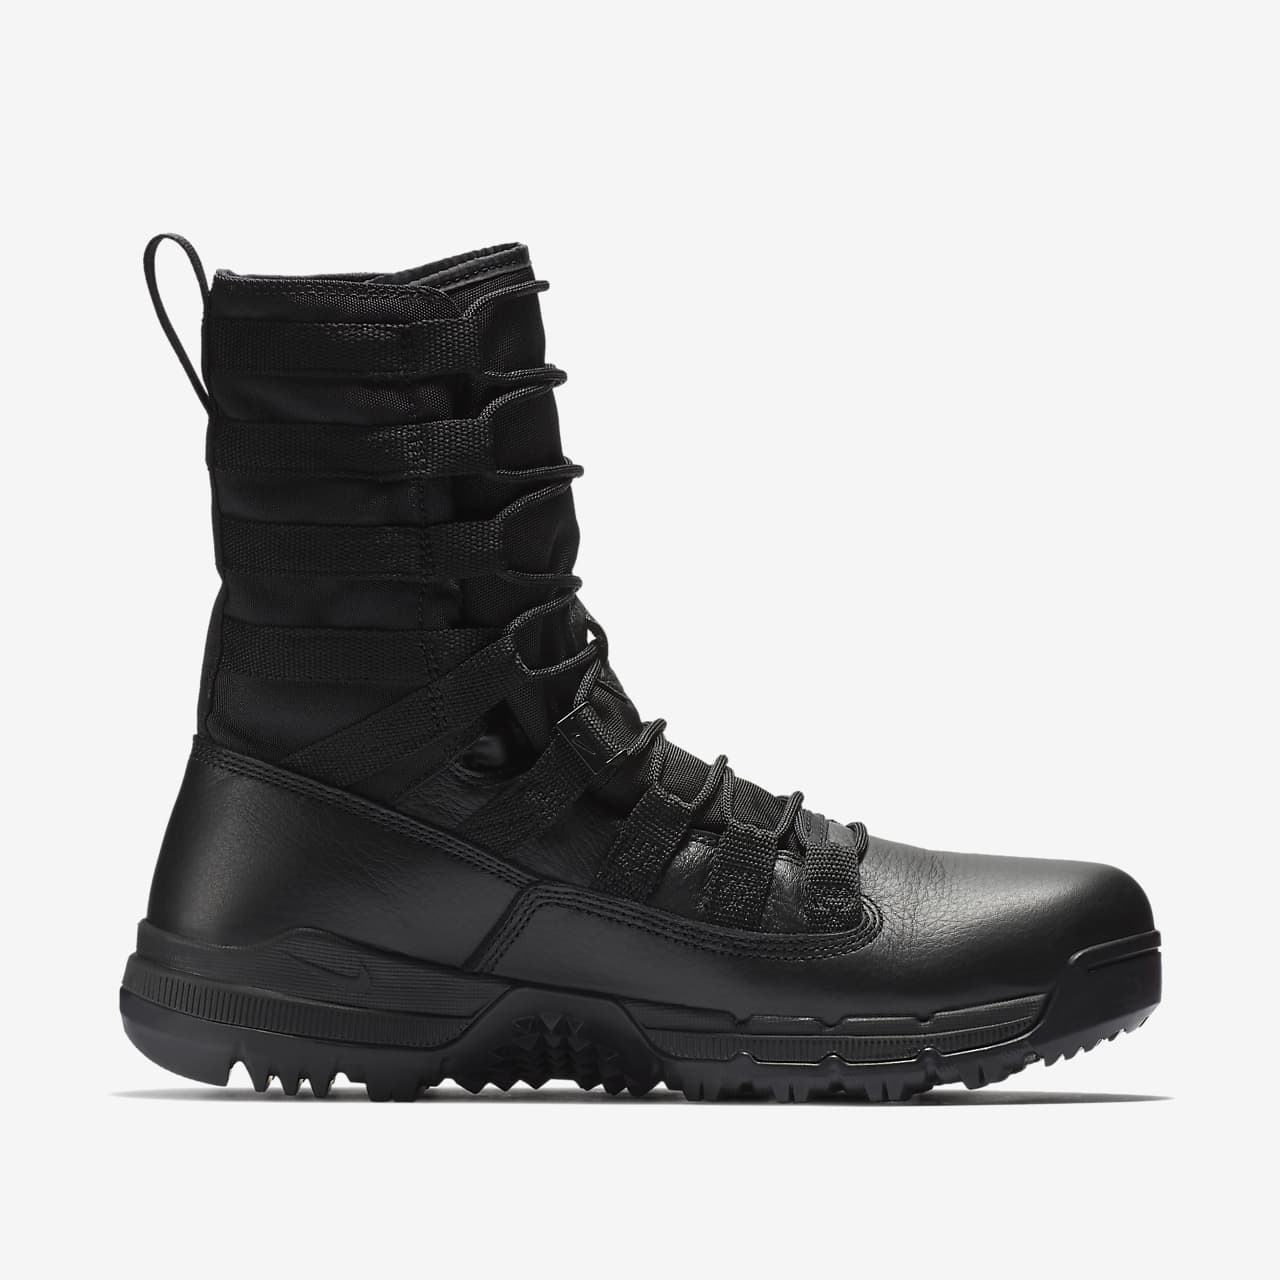 Nike SFB Gen 8” Tactical Boot | lupon.gov.ph